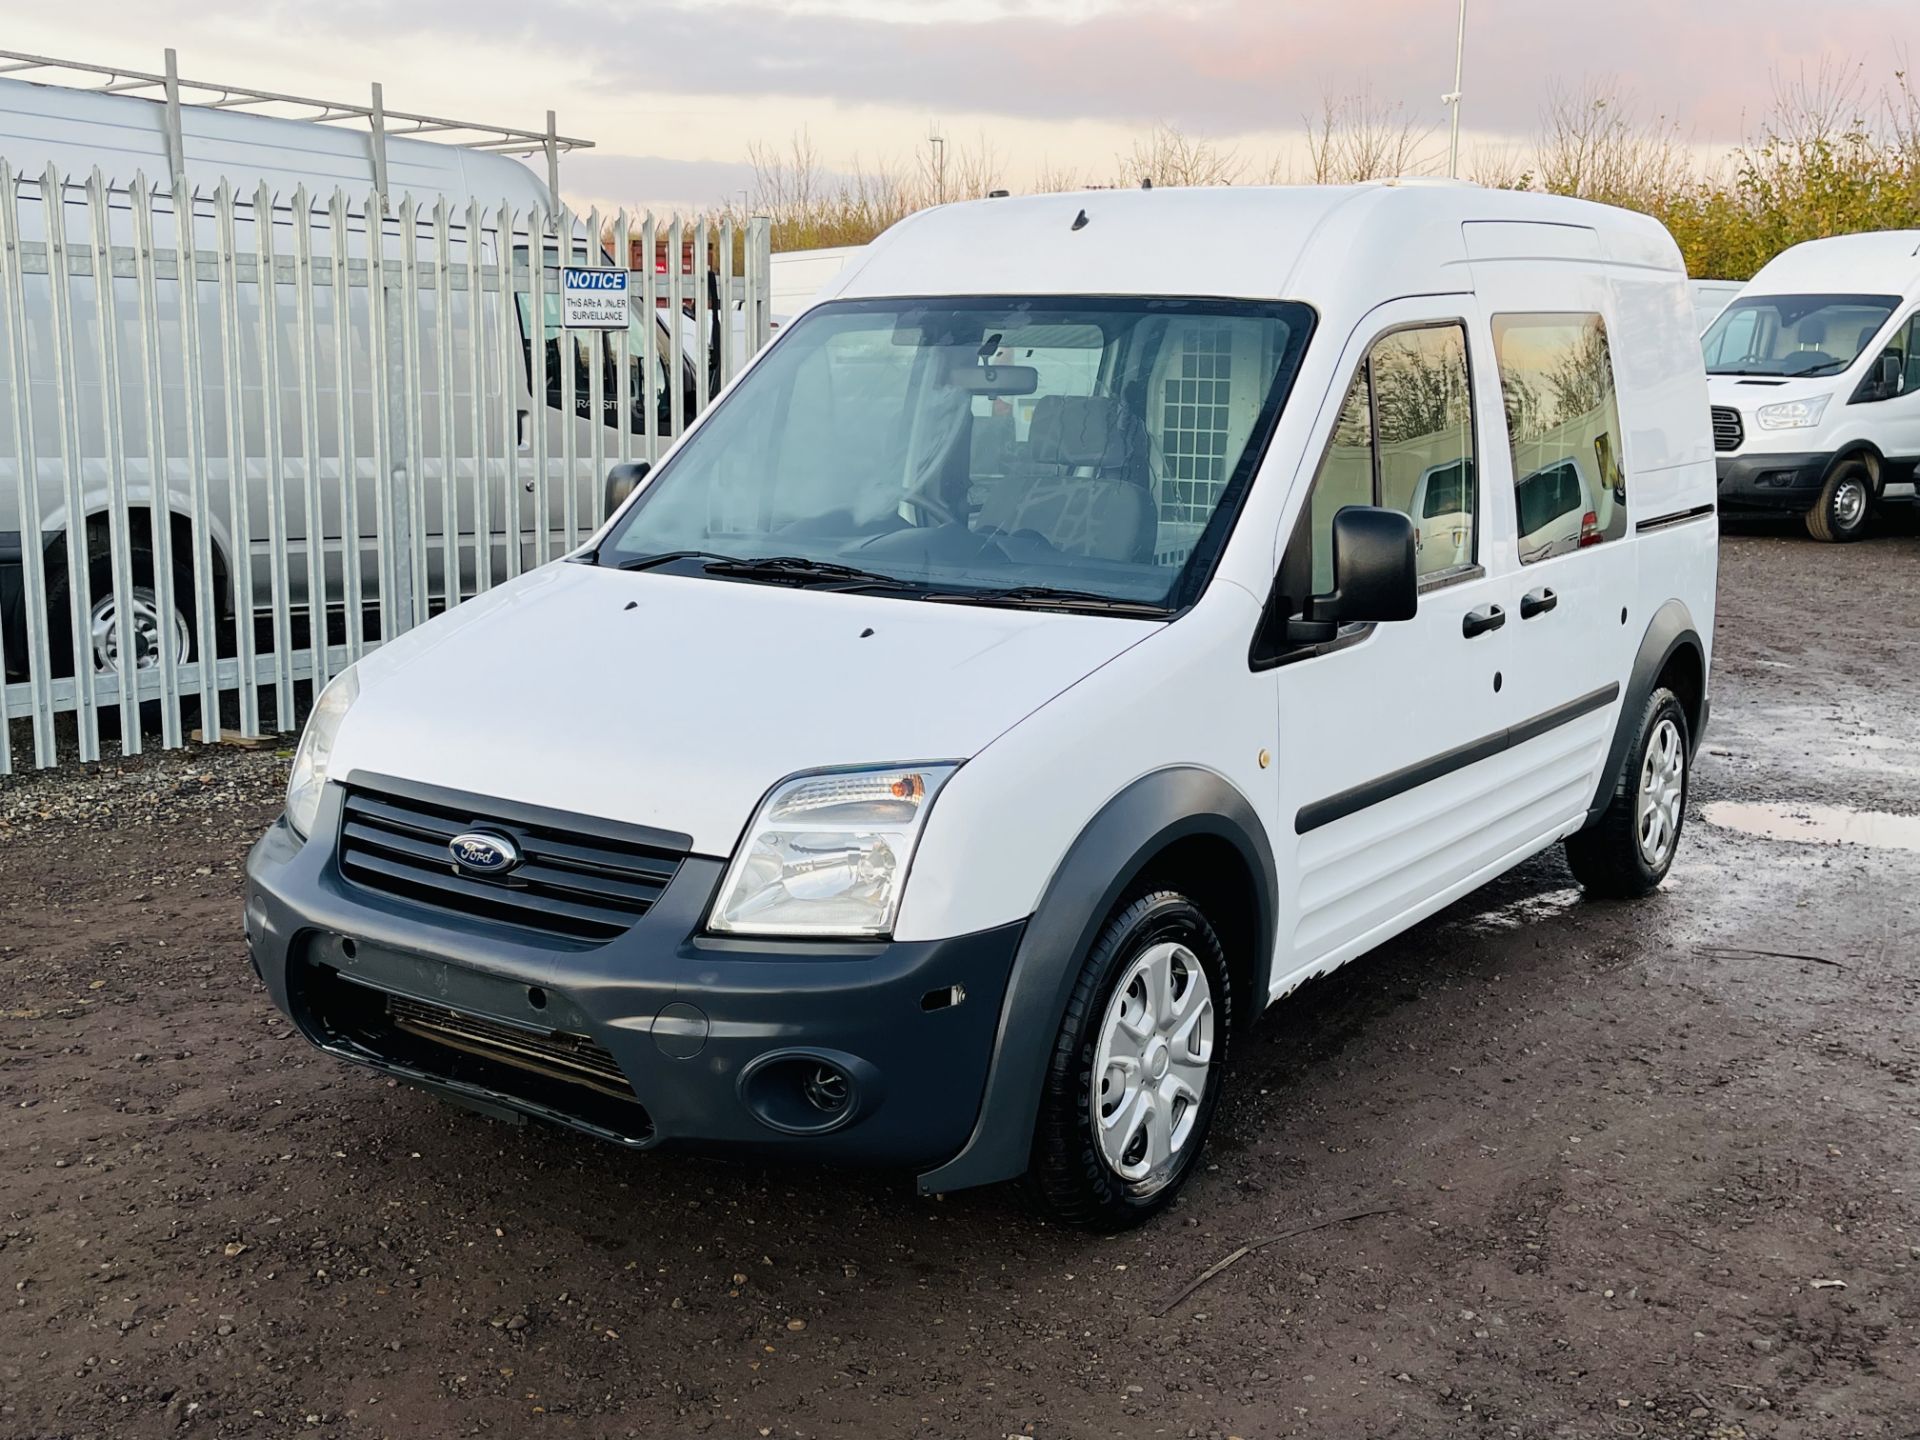 Ford Transit connect 1.8 TDCI LWB High Roof 2013 '13 Reg' A/C Elec pack - Image 4 of 21